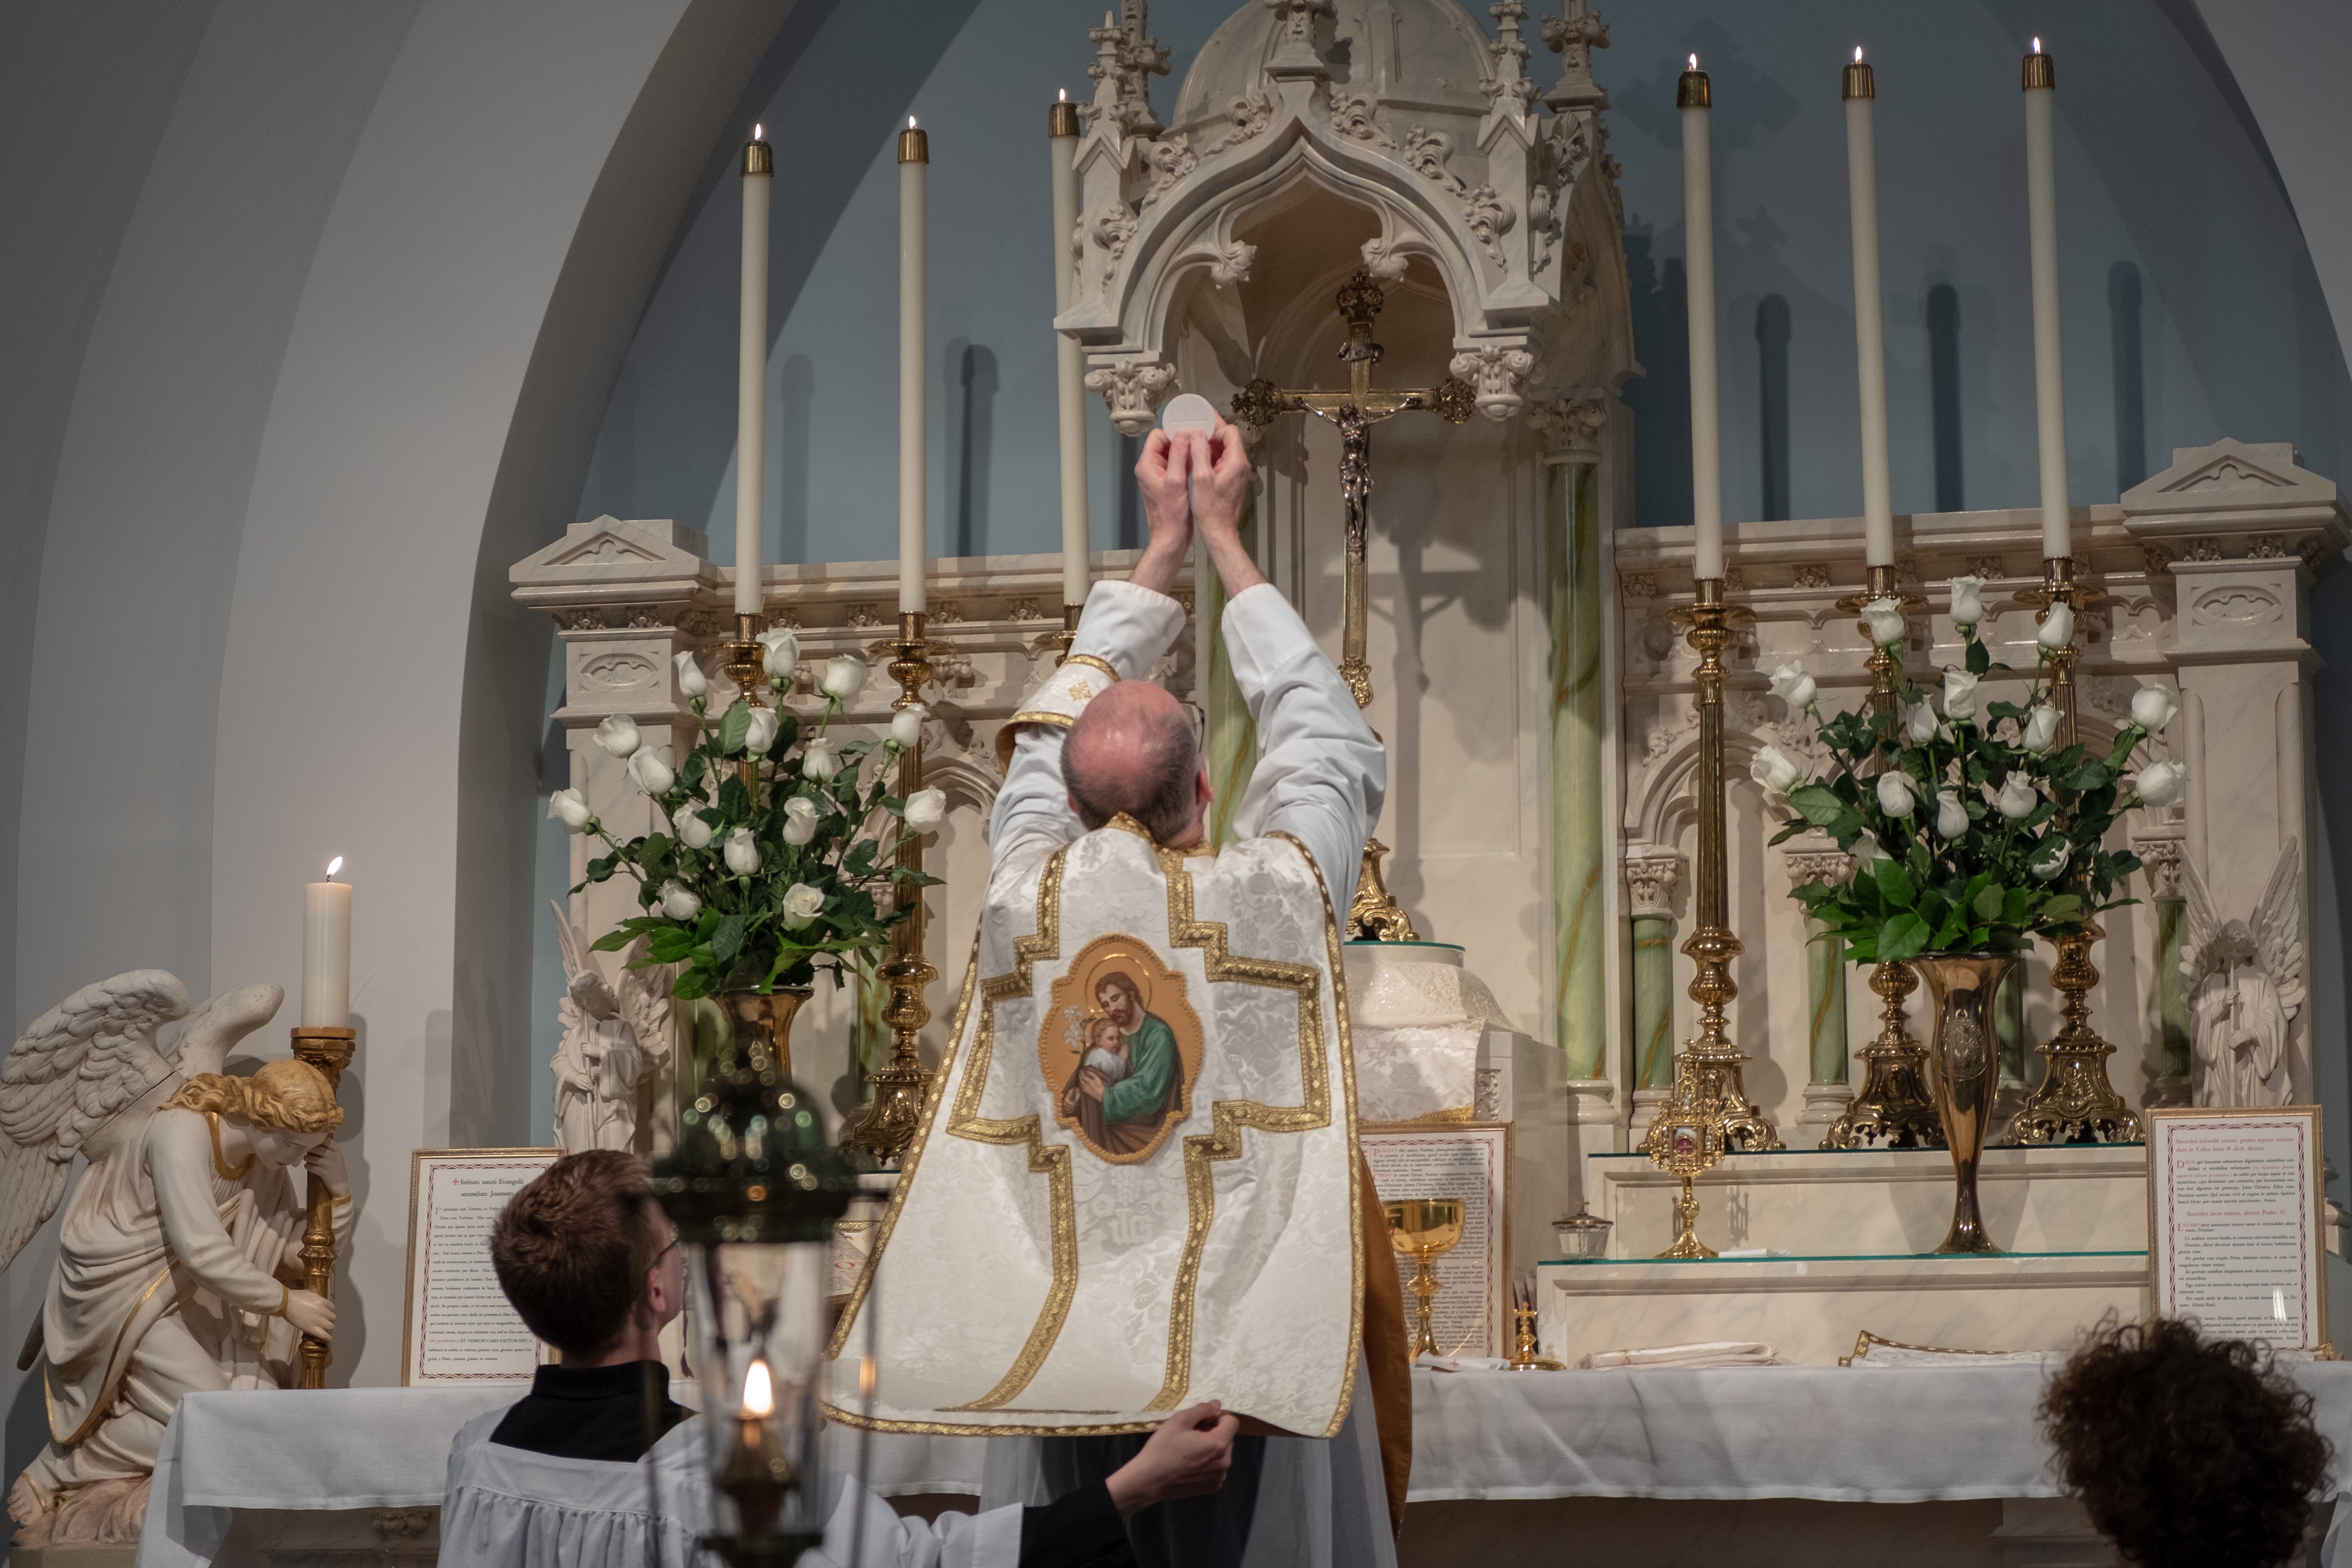 Priest celebrating Mass in Extraordinary Form with altar server holding chasuble behind him